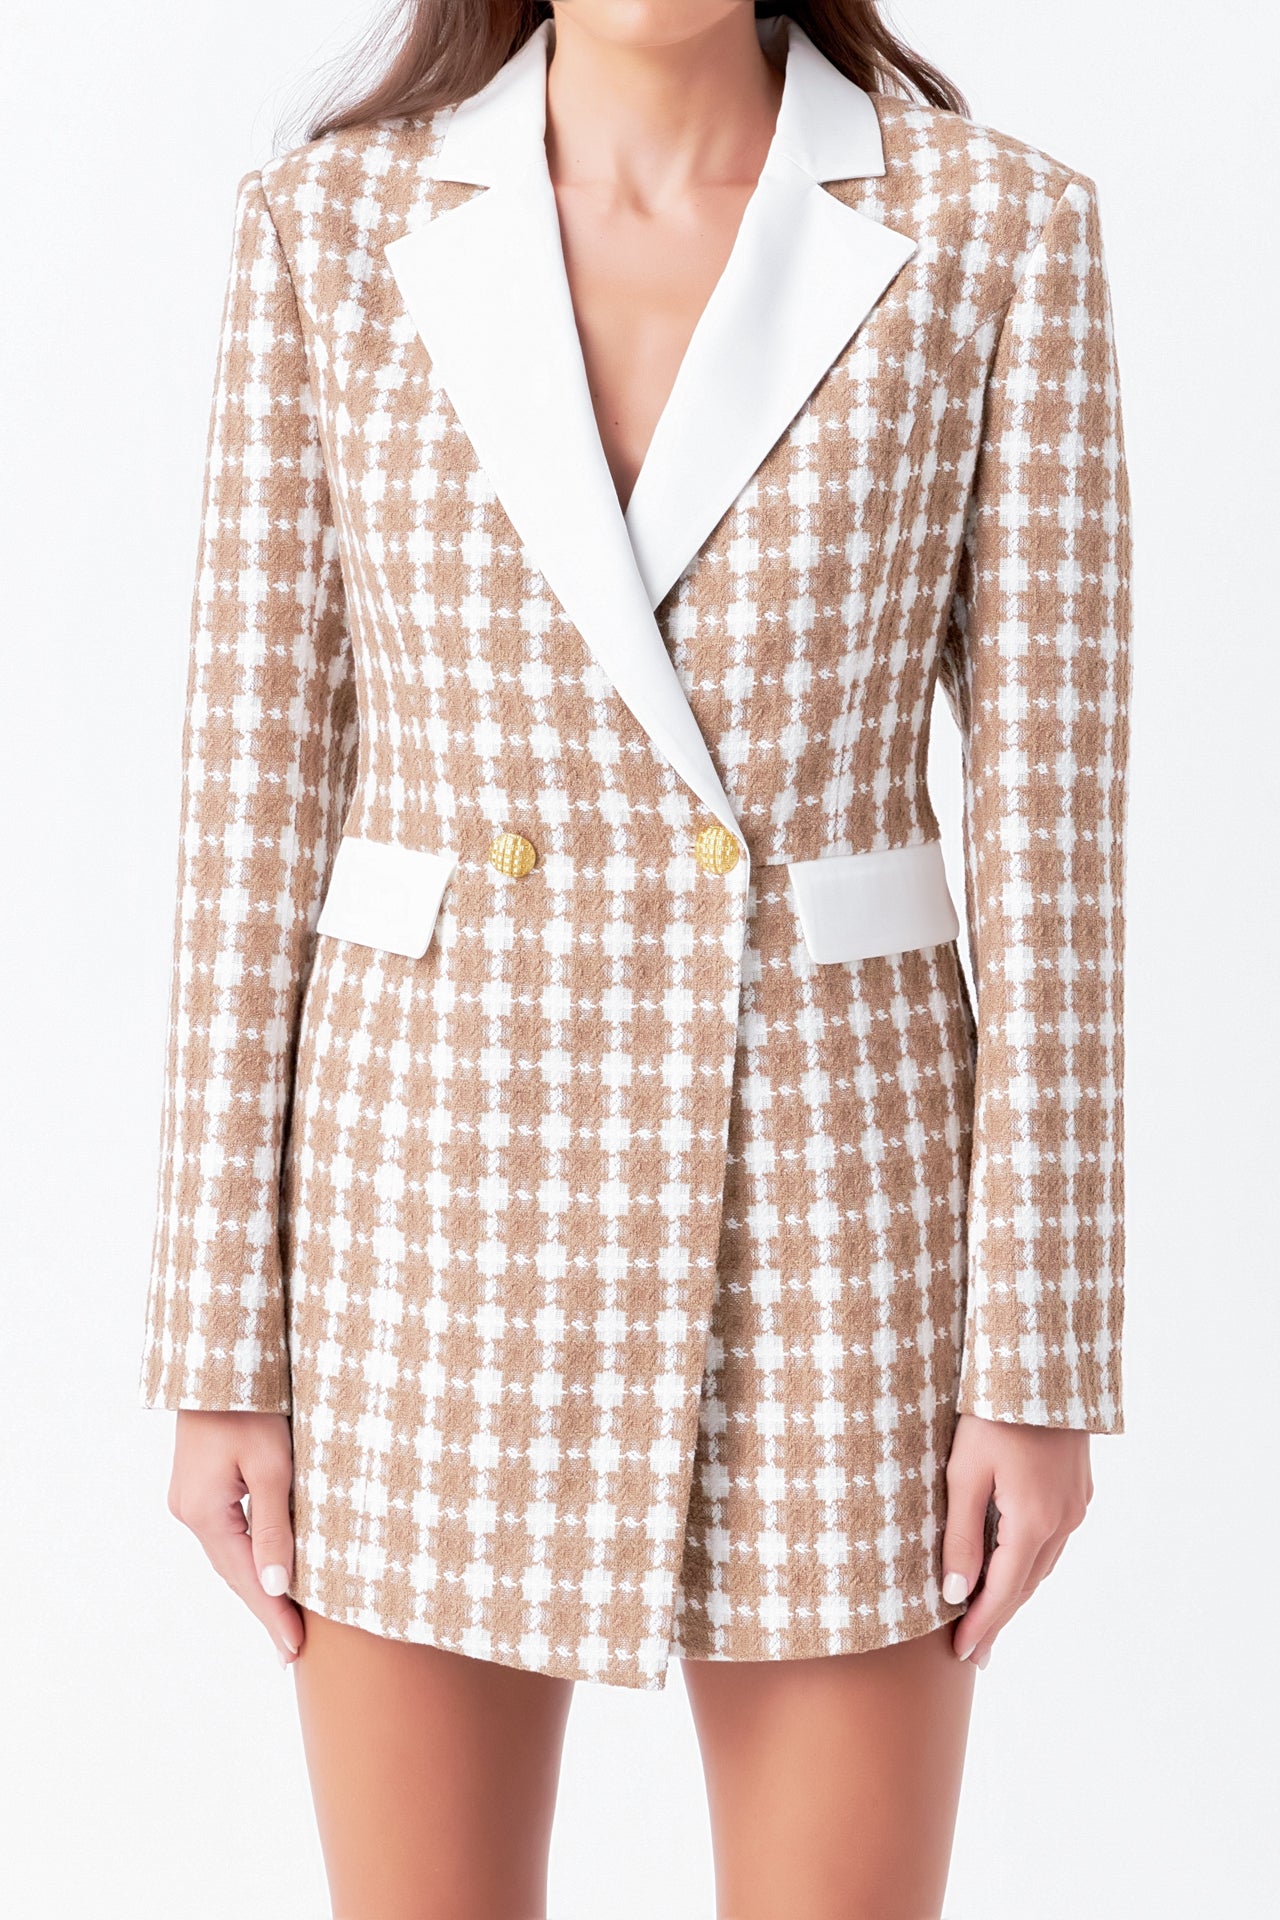 Endless Rose - Premium Houndstooth Blazer Romper - Rompers in Women's Clothing available at endlessrose.com